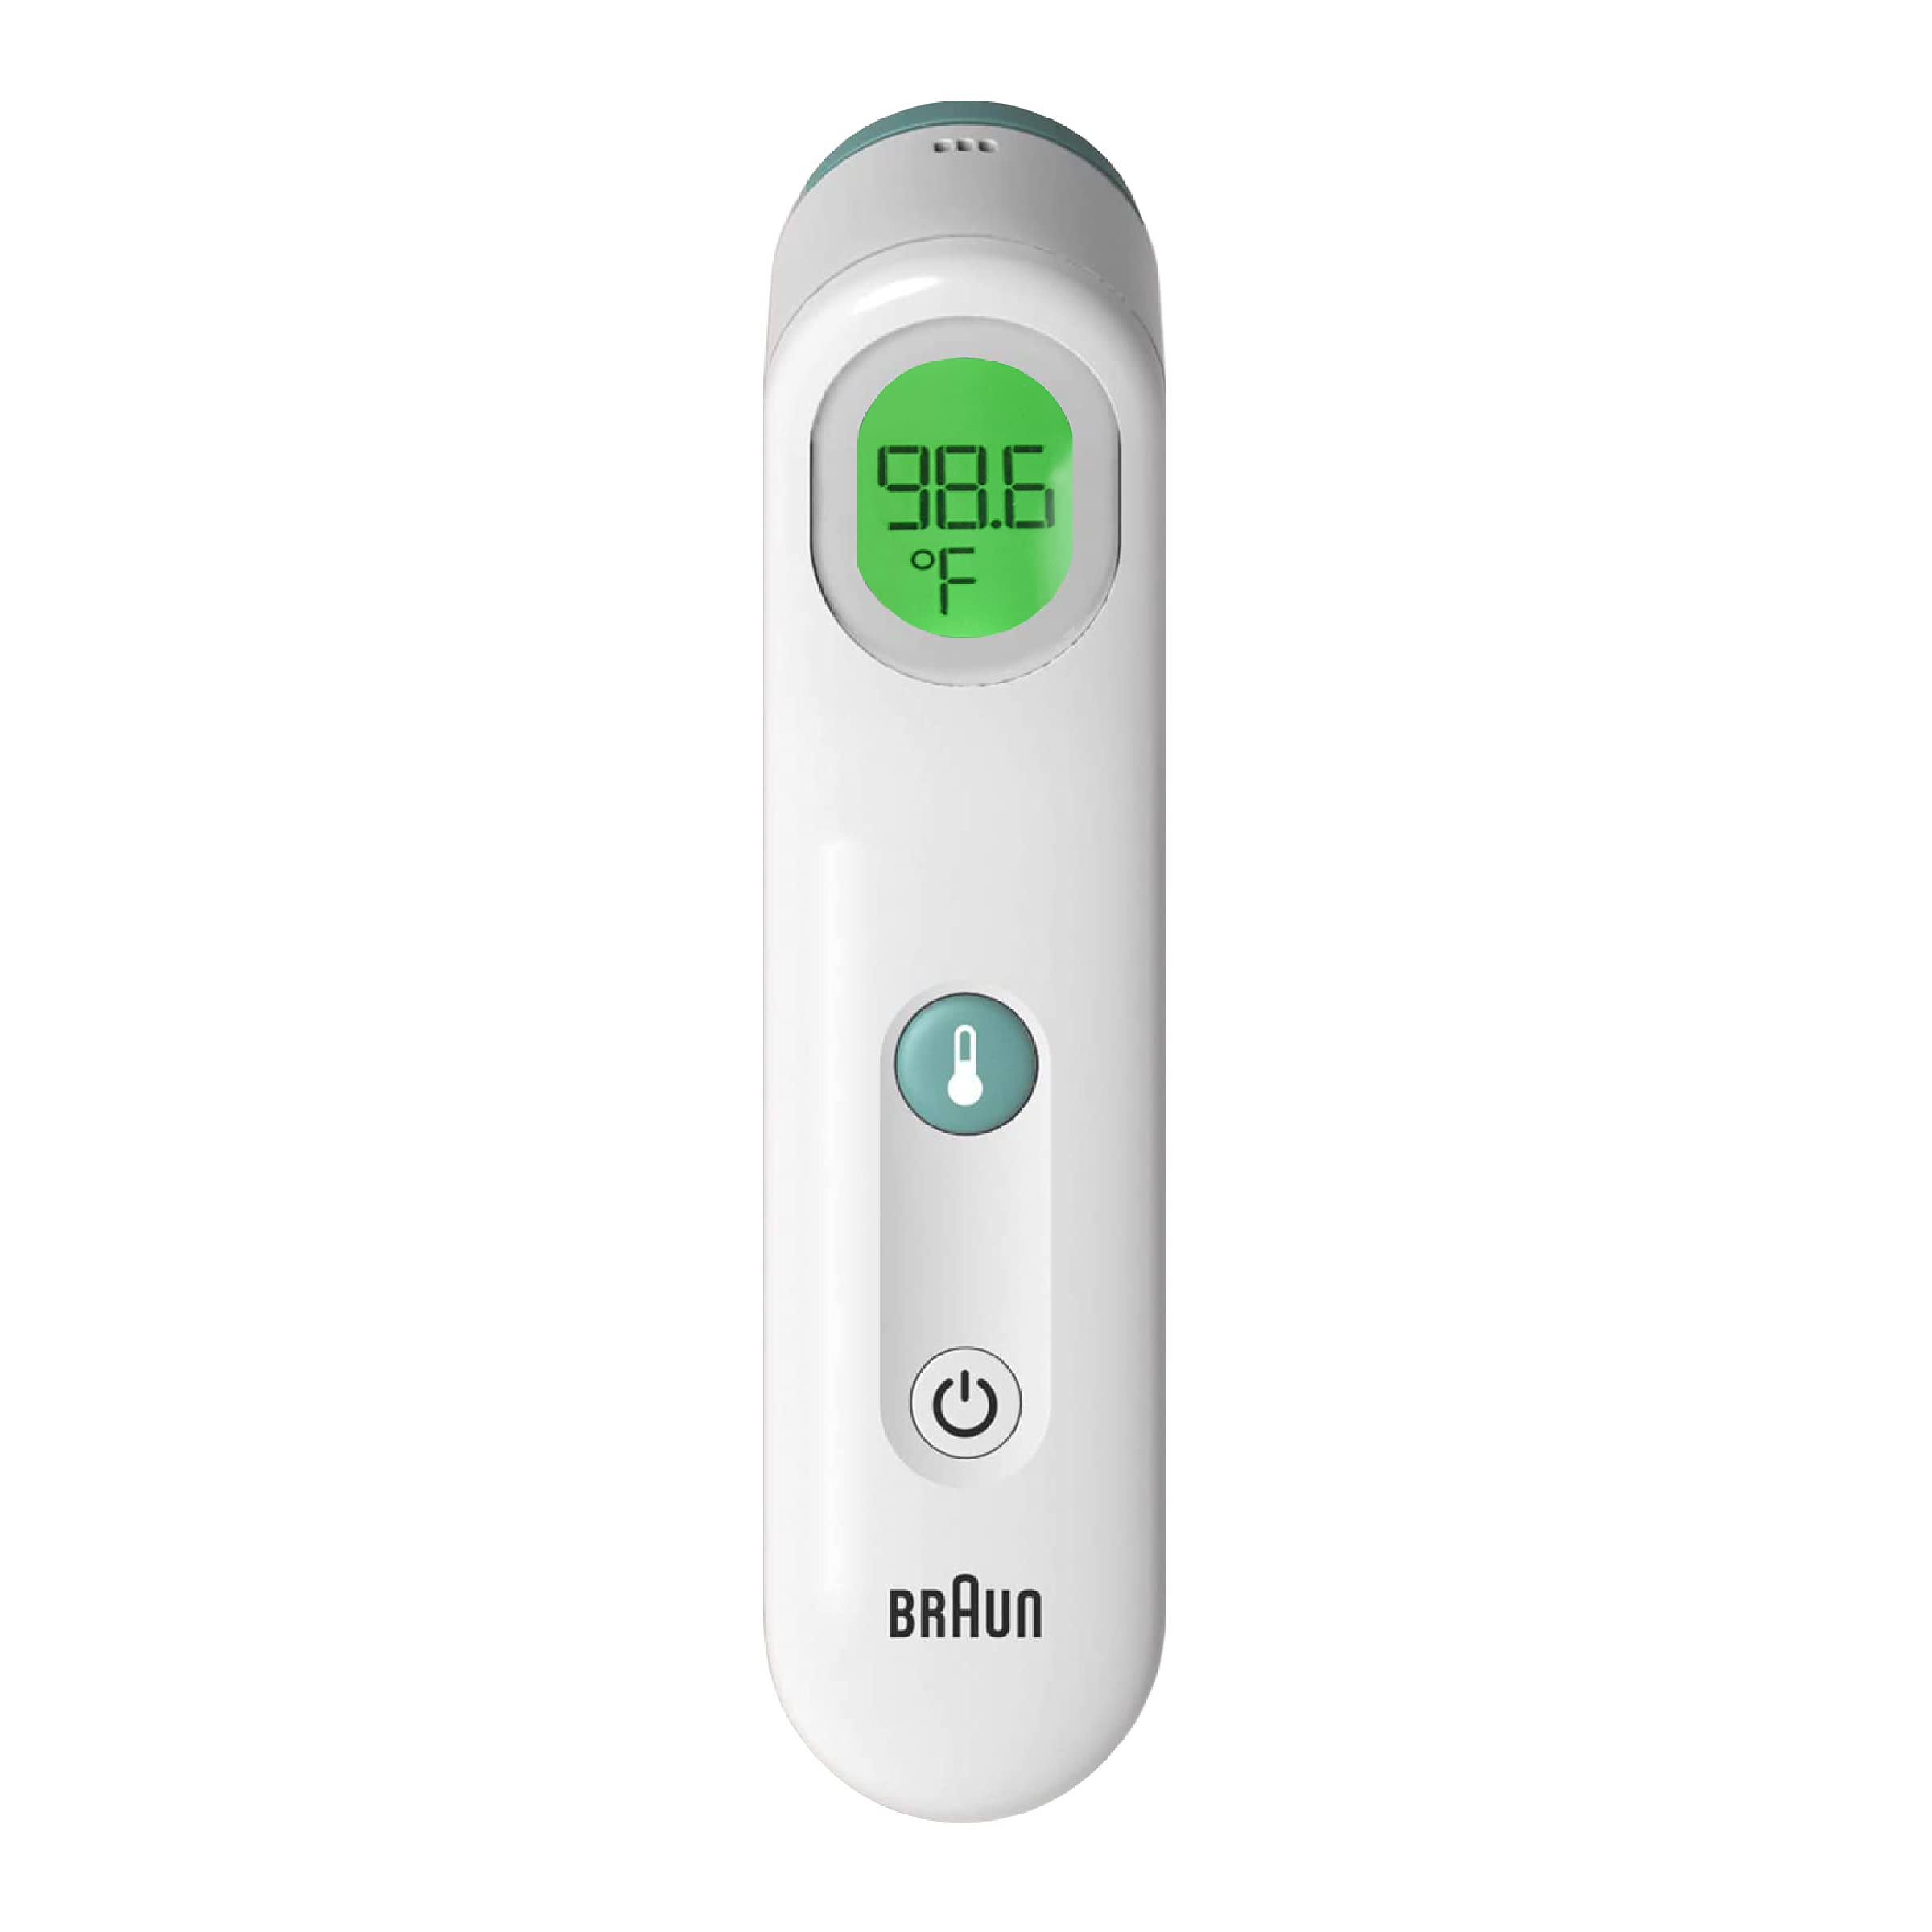 Braun Digital Ear Thermometer for Babies, Kids, Toddlers and Adults,  ThermoScan 5 IRT6500, Display is Digital and Accurate, Thermometer for  Precise